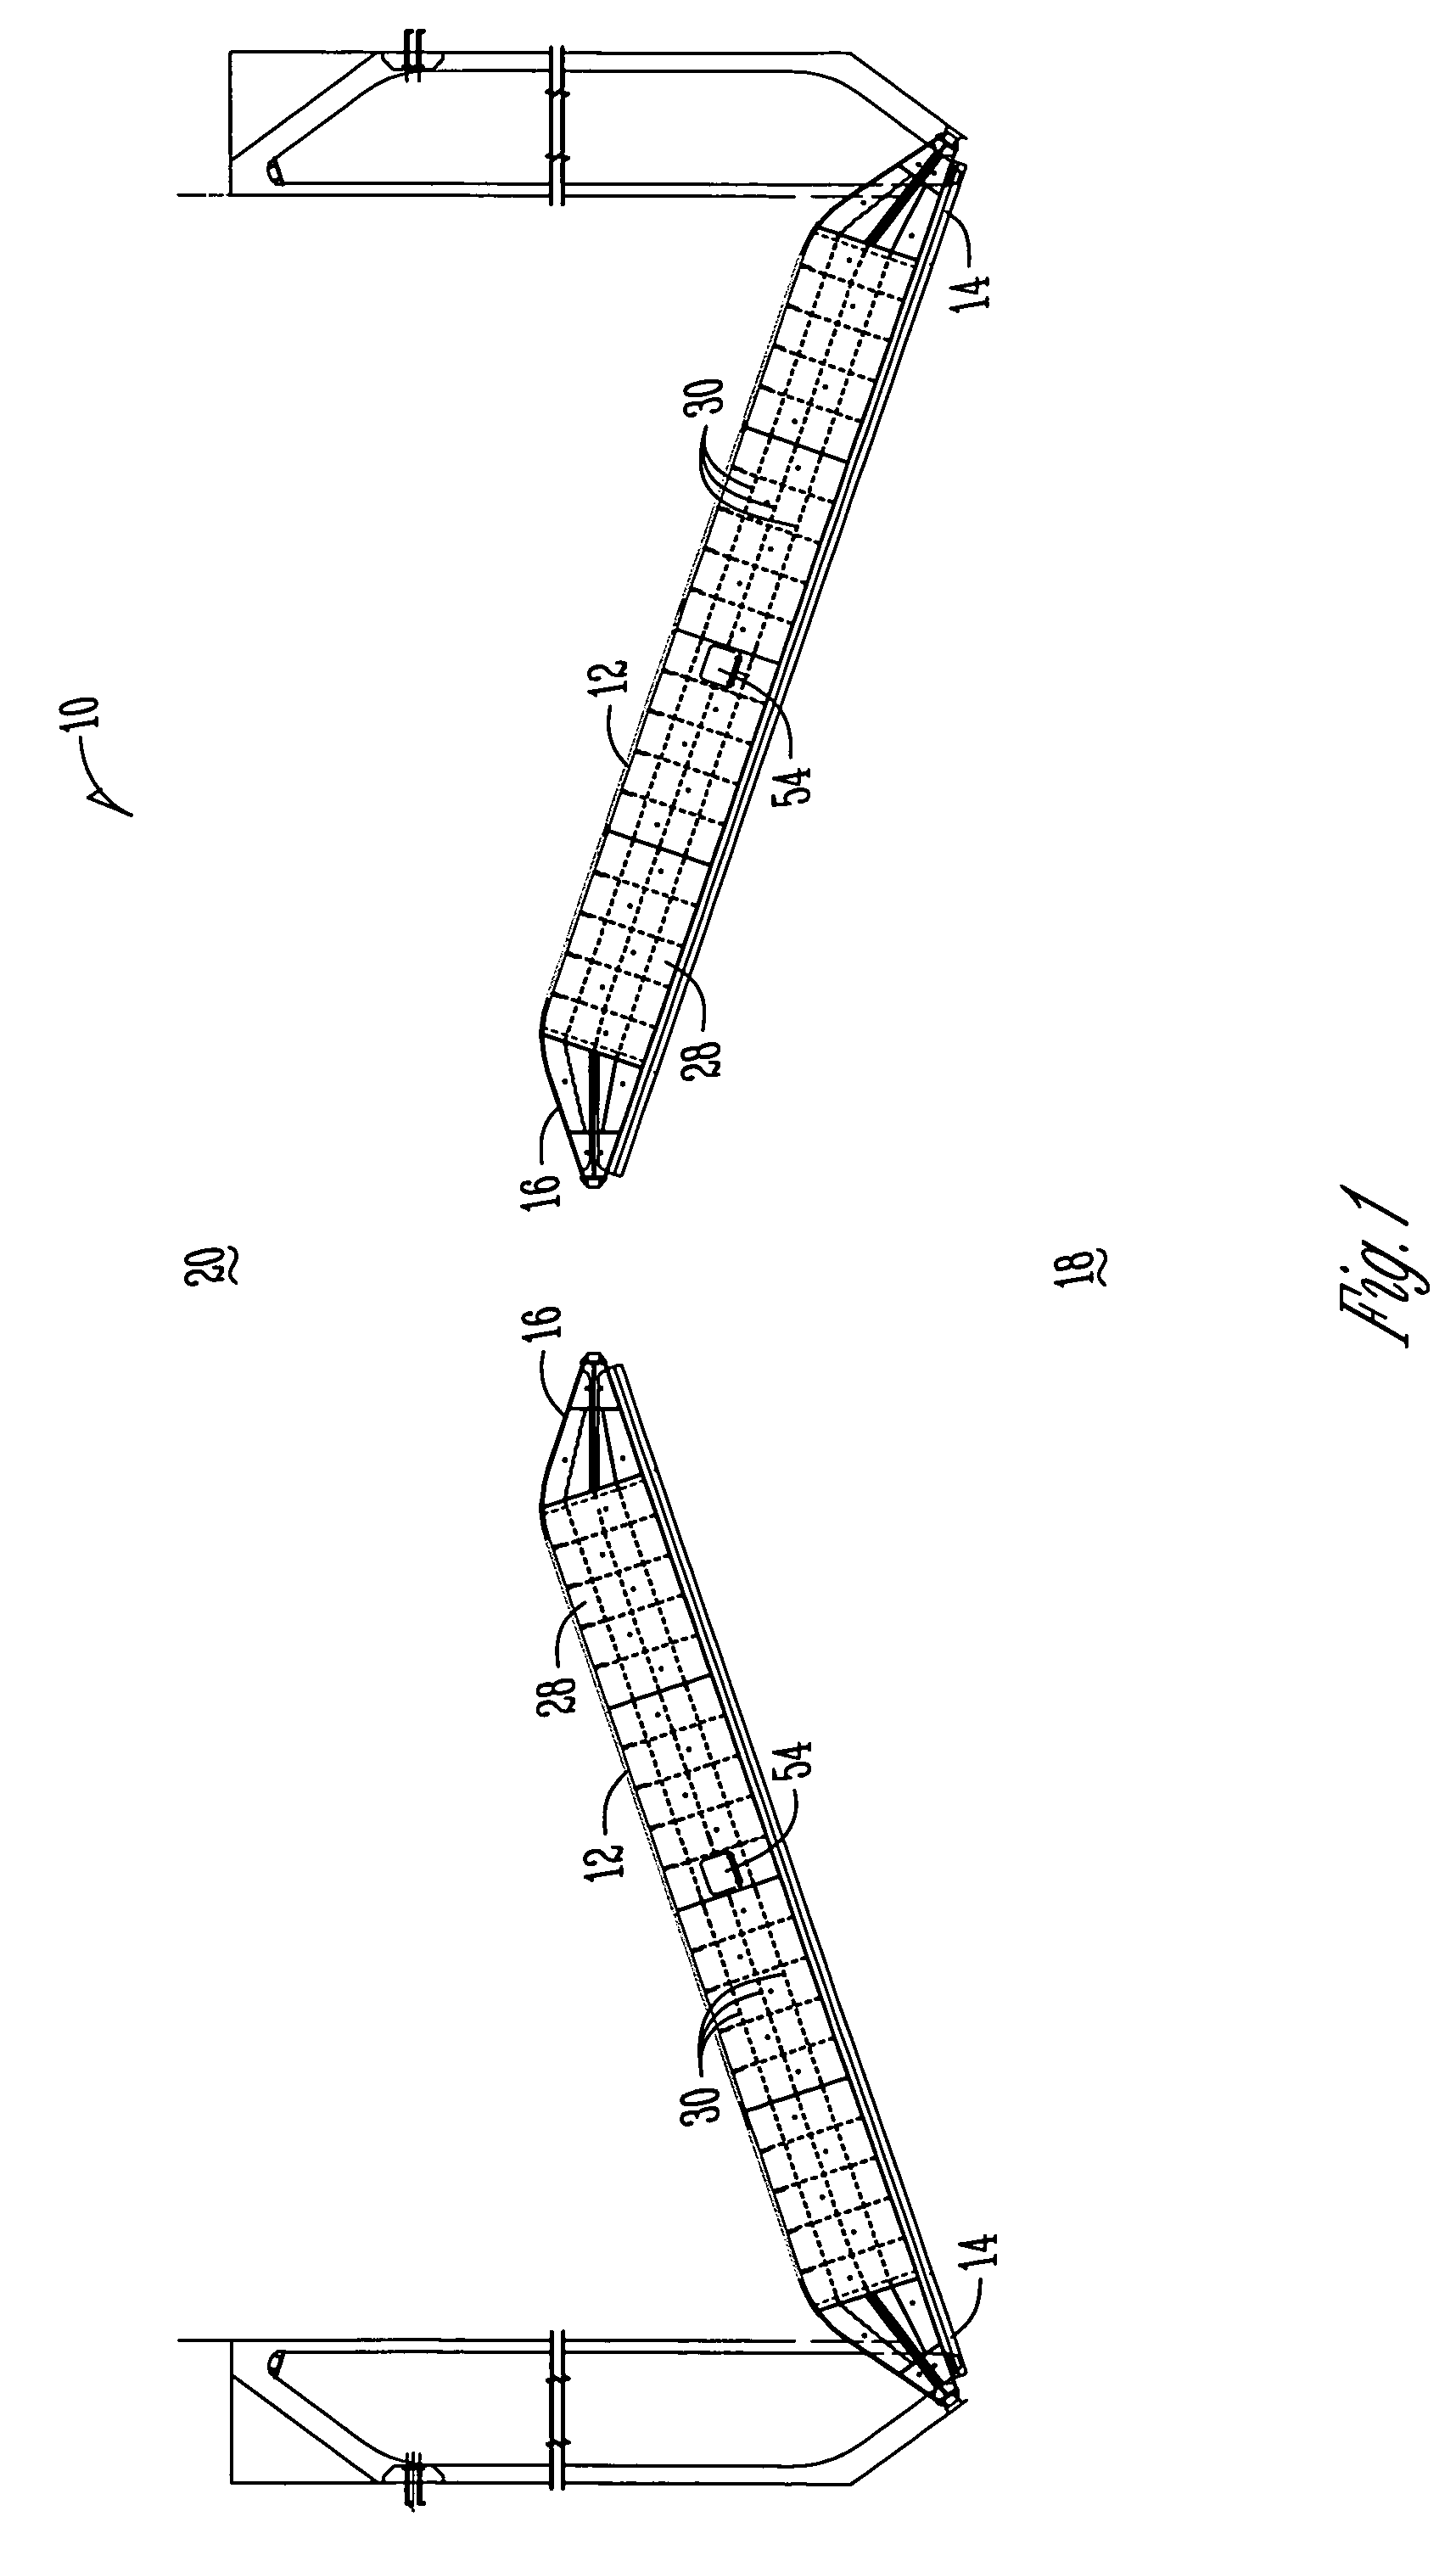 Method and apparatus for an improved lock and dam assembly